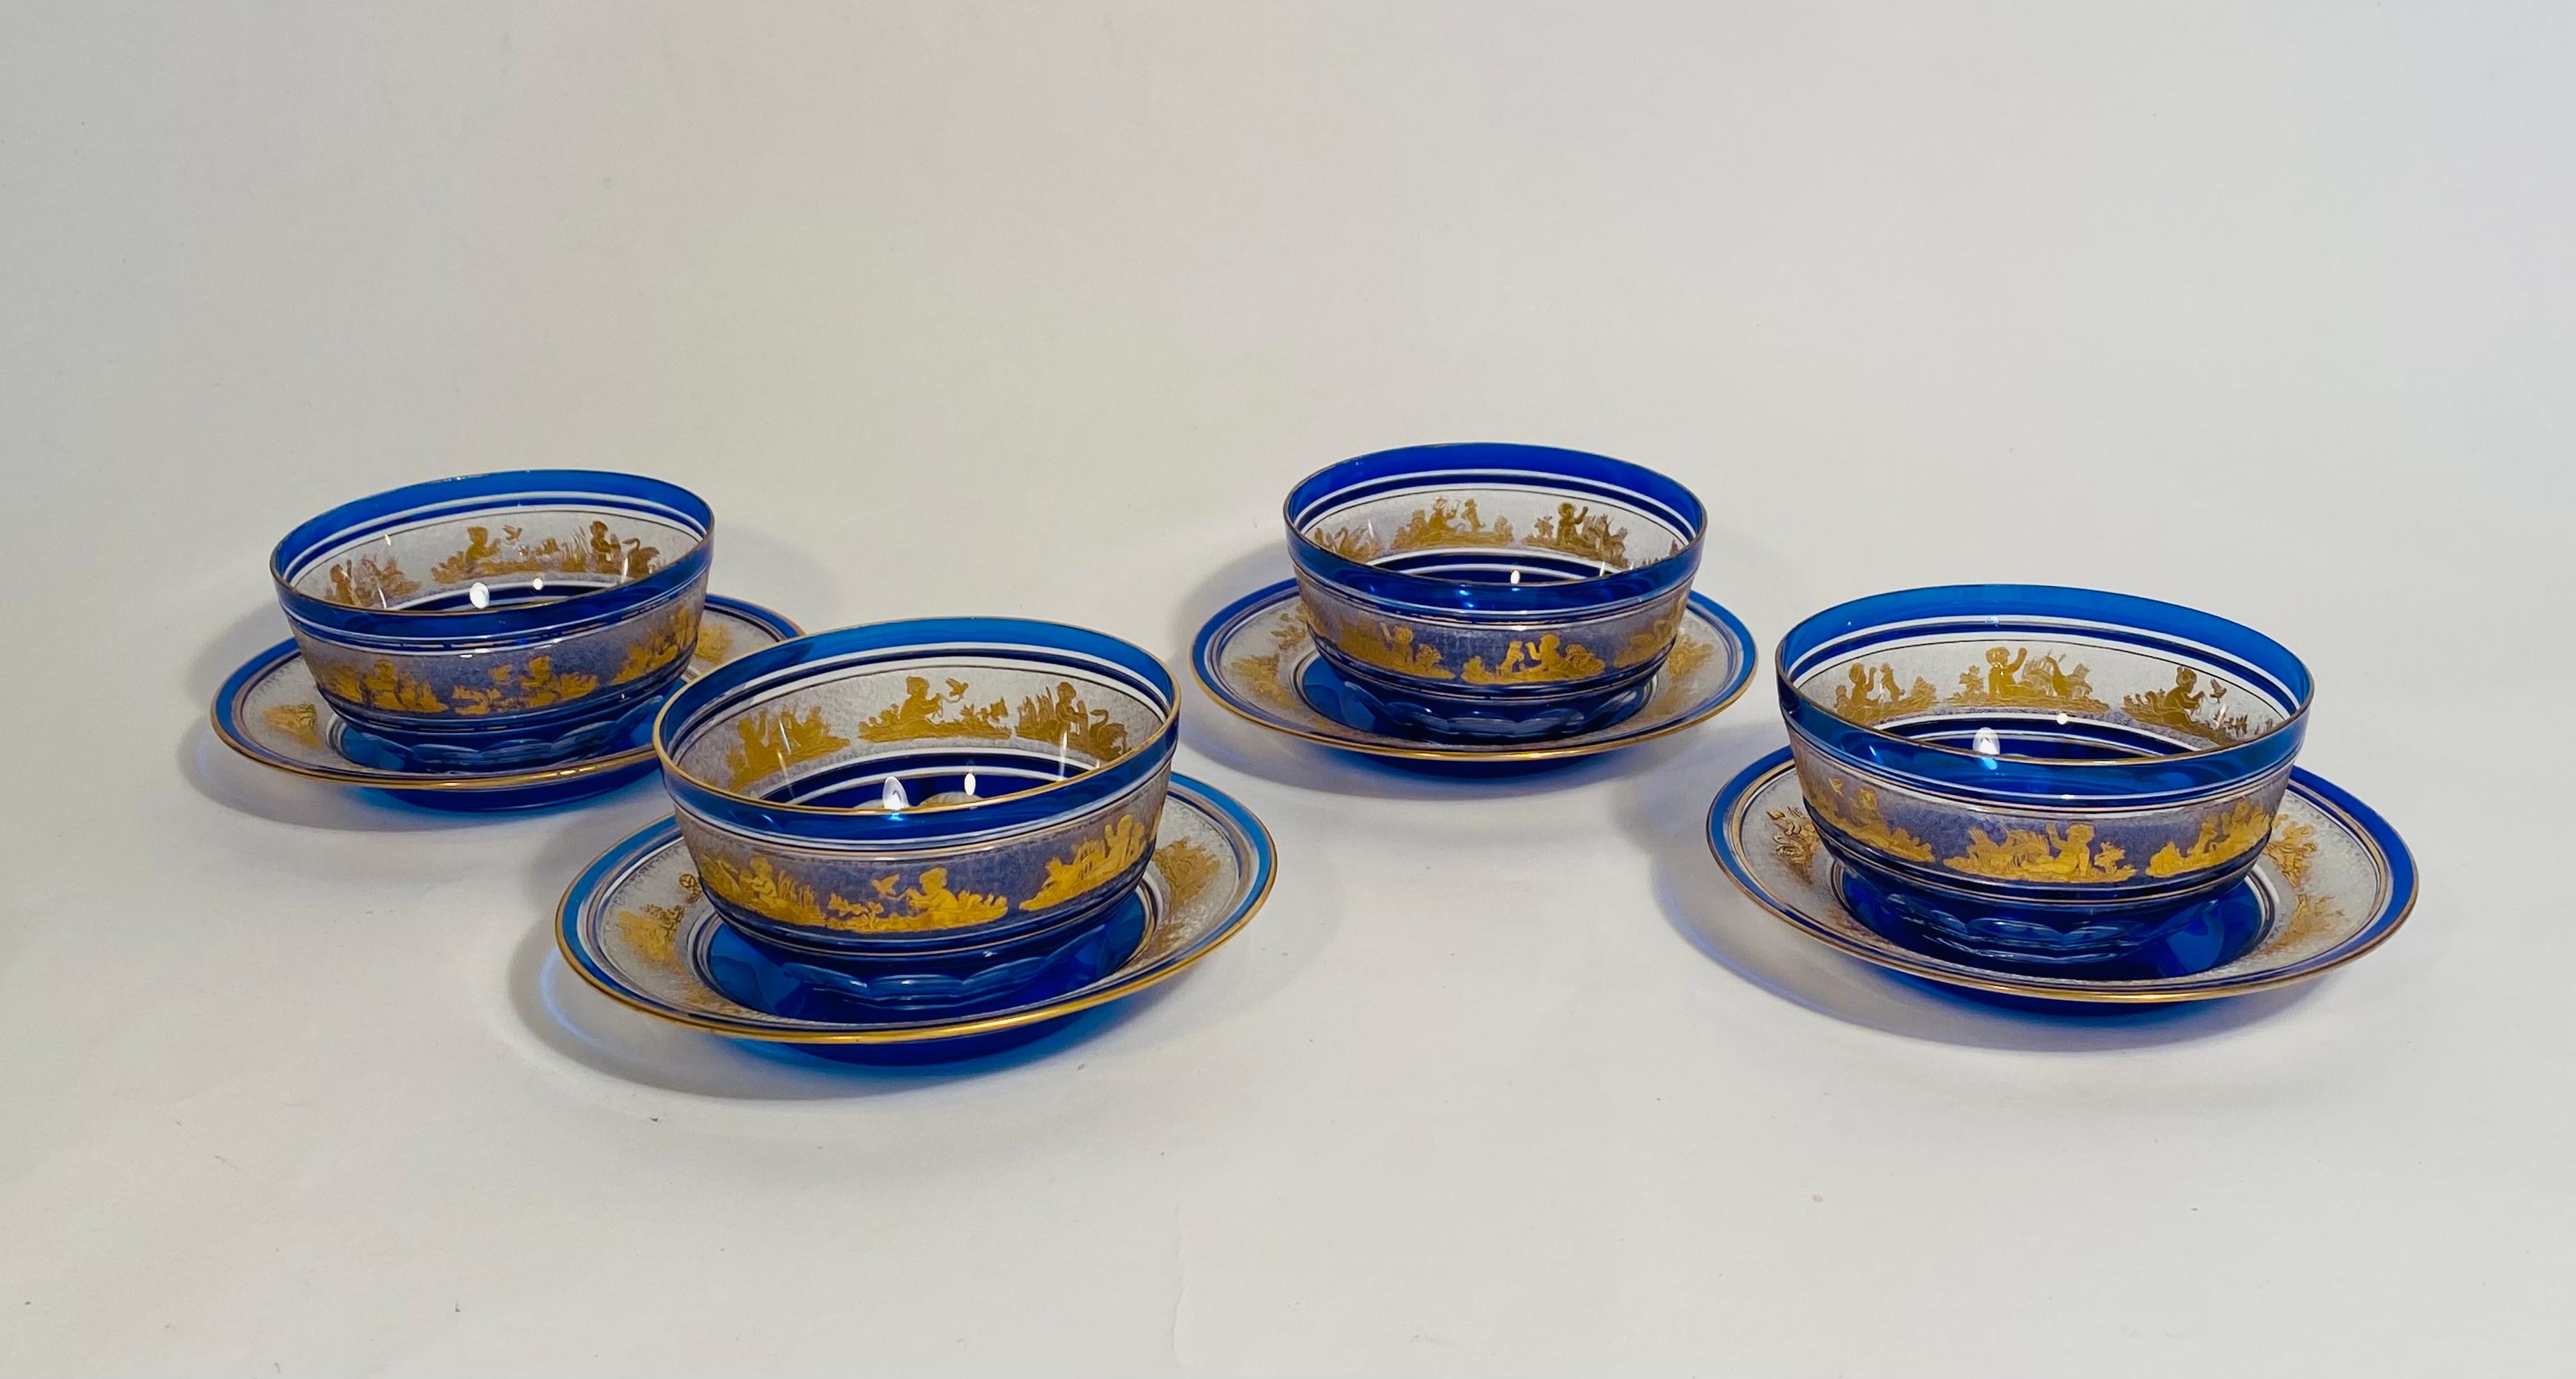 One of the most successful and sought after patterns by Val Saint Lambert is their Danse de Flore. This set of 4 bowls and plates (8 Pieces) is done in a striking cobalt blue crystal. We love the classic gilded pattern on an acid etched background.